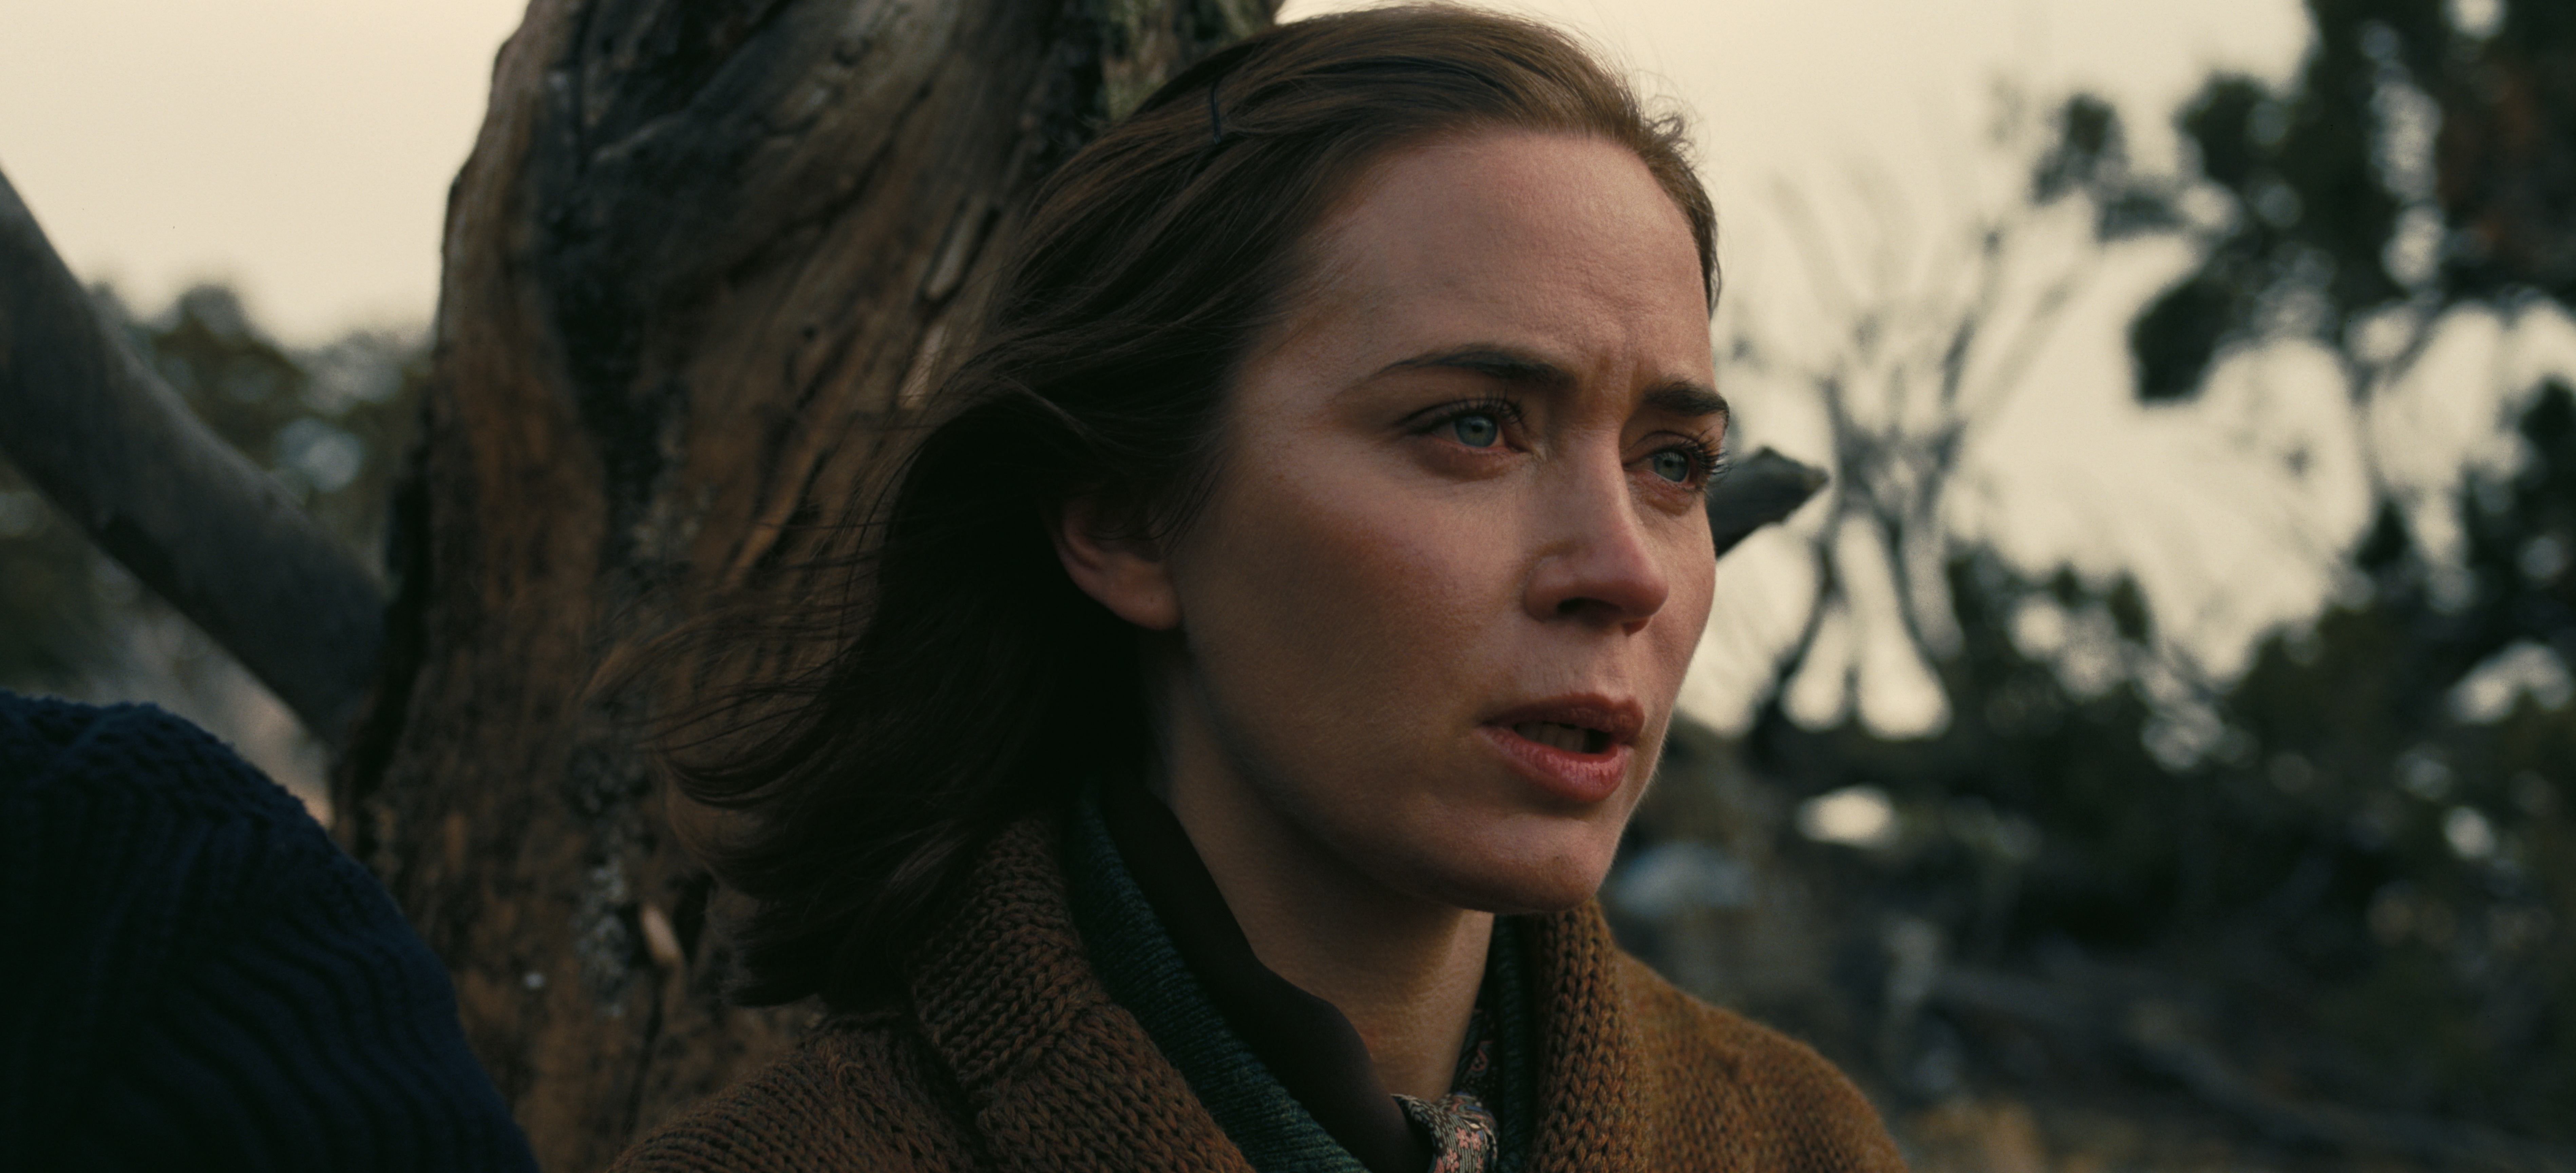 HD wallpaper featuring a still from the film Oppenheimer with Emily Blunt portraying a character, set against a natural backdrop, perfect for a desktop background.